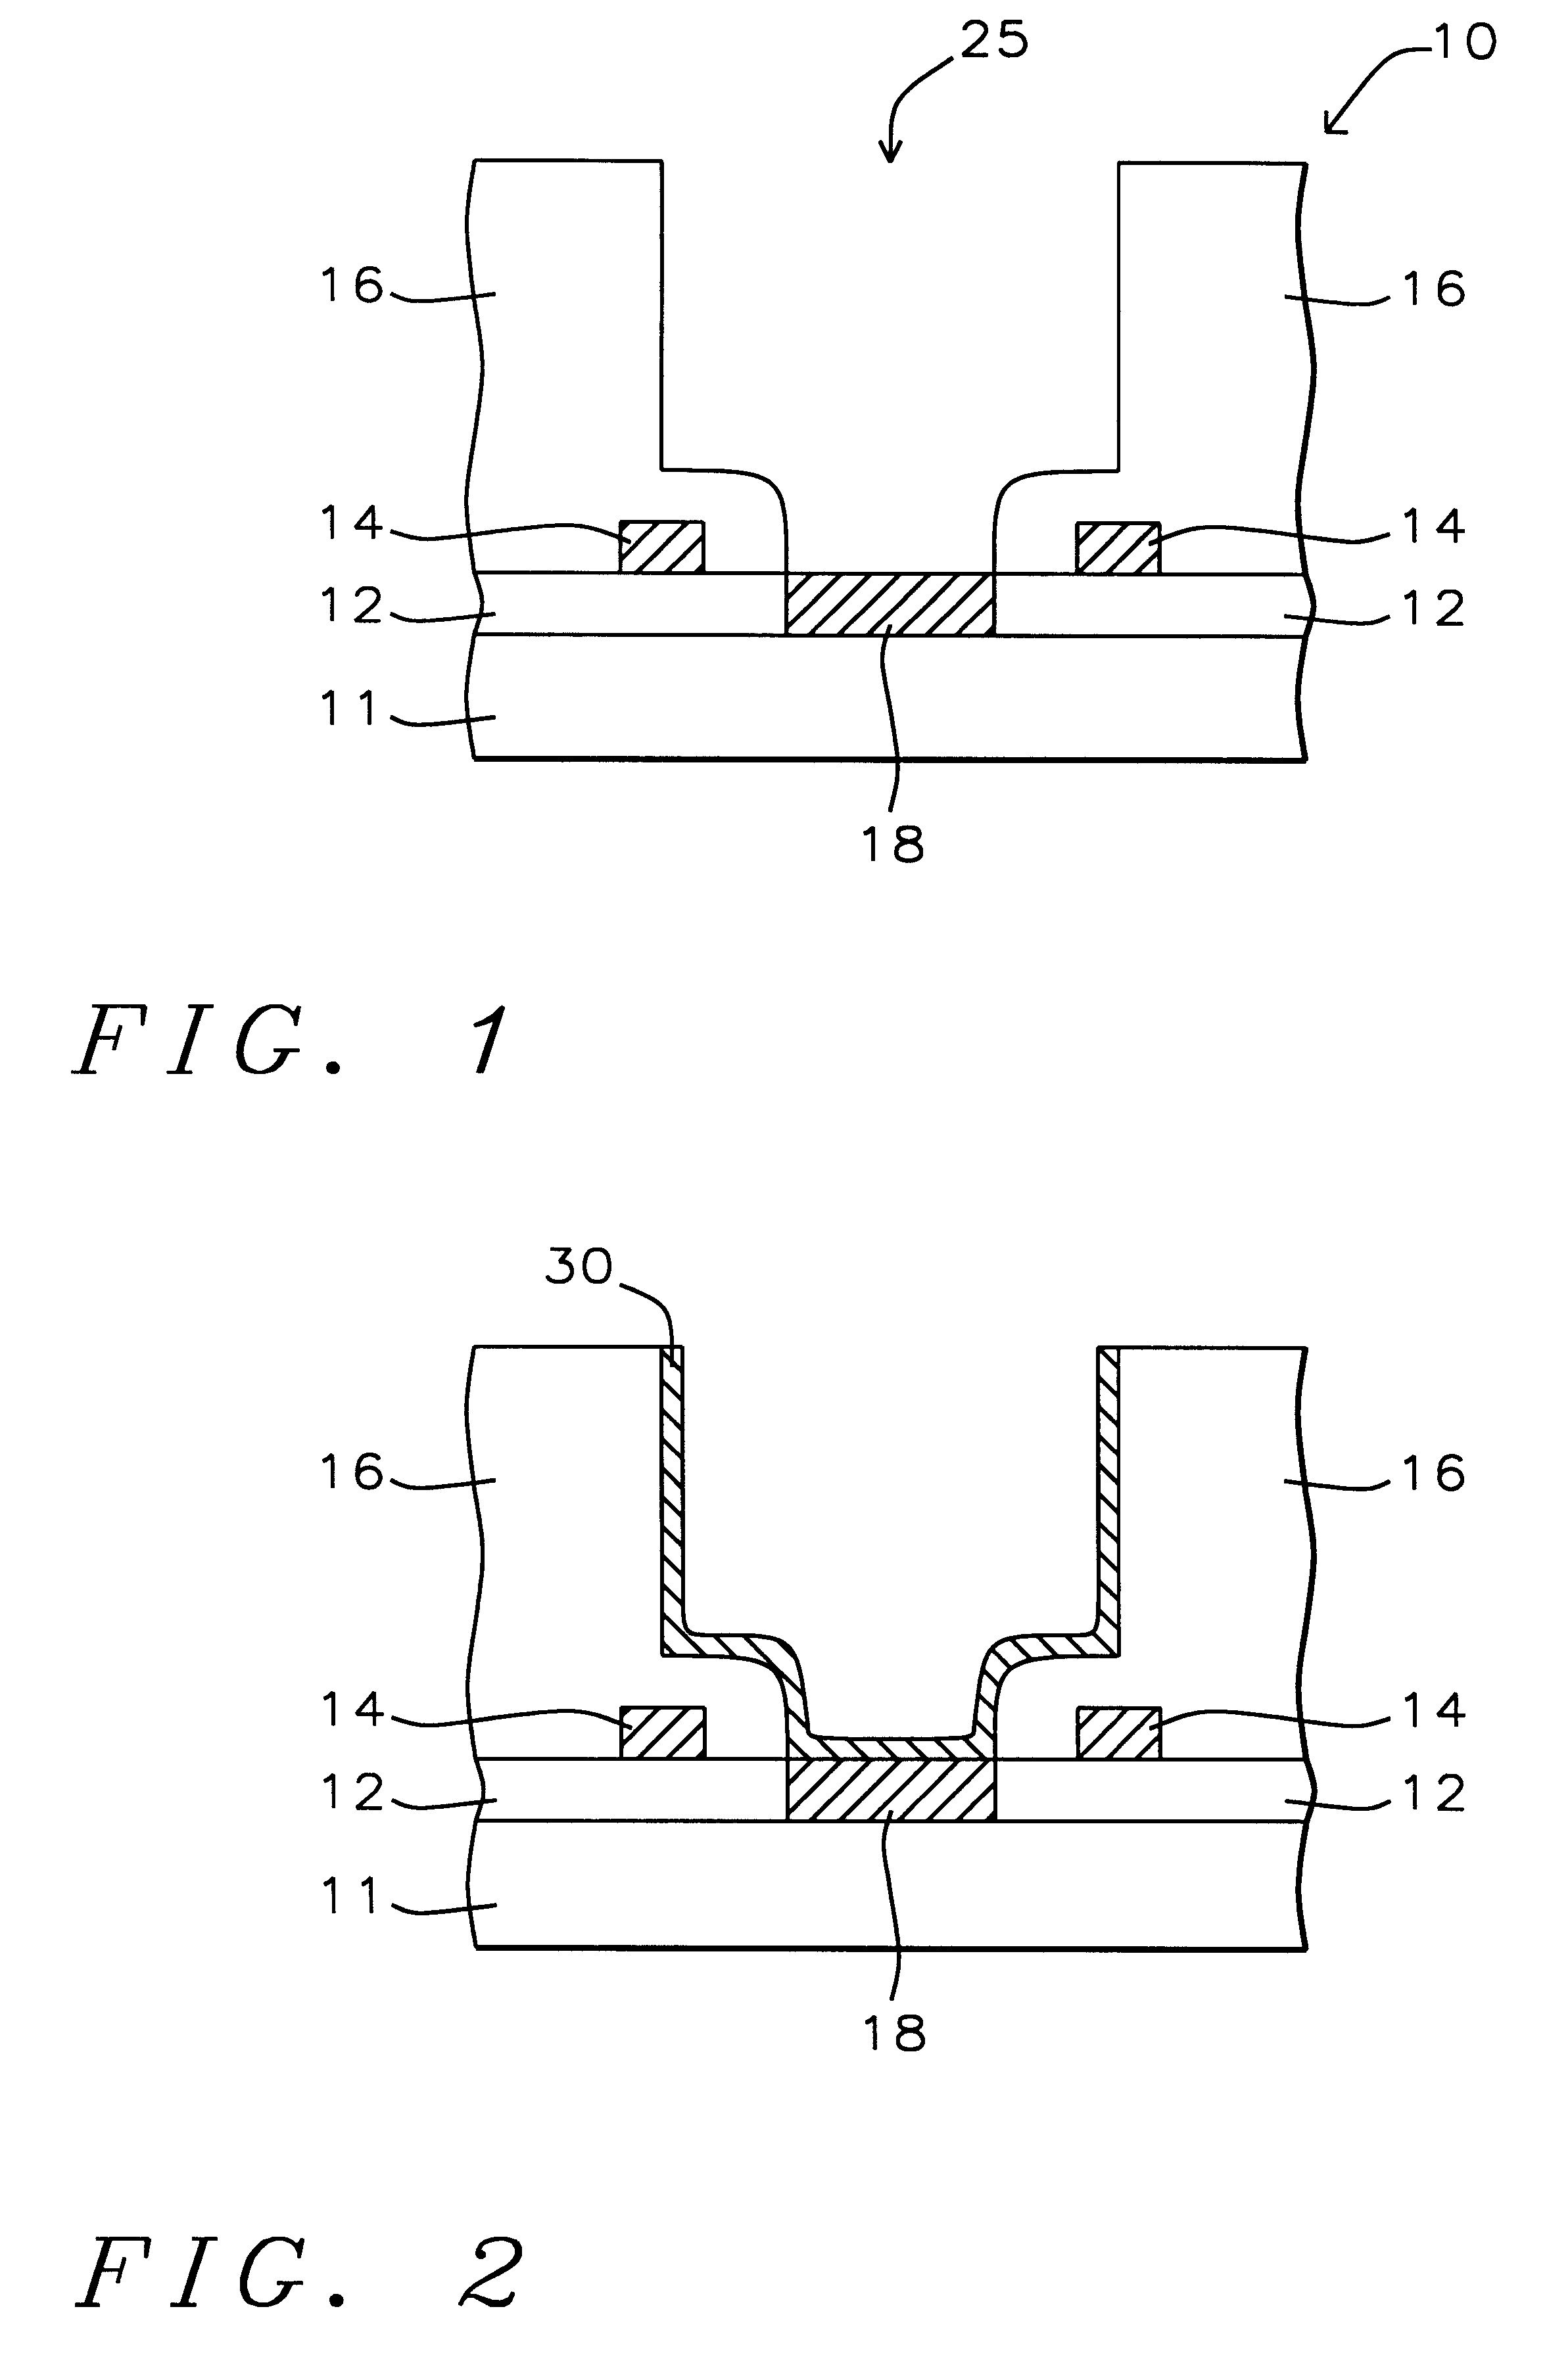 Structure and method for forming a capacitor dielectric using yttrium barium copper oxide